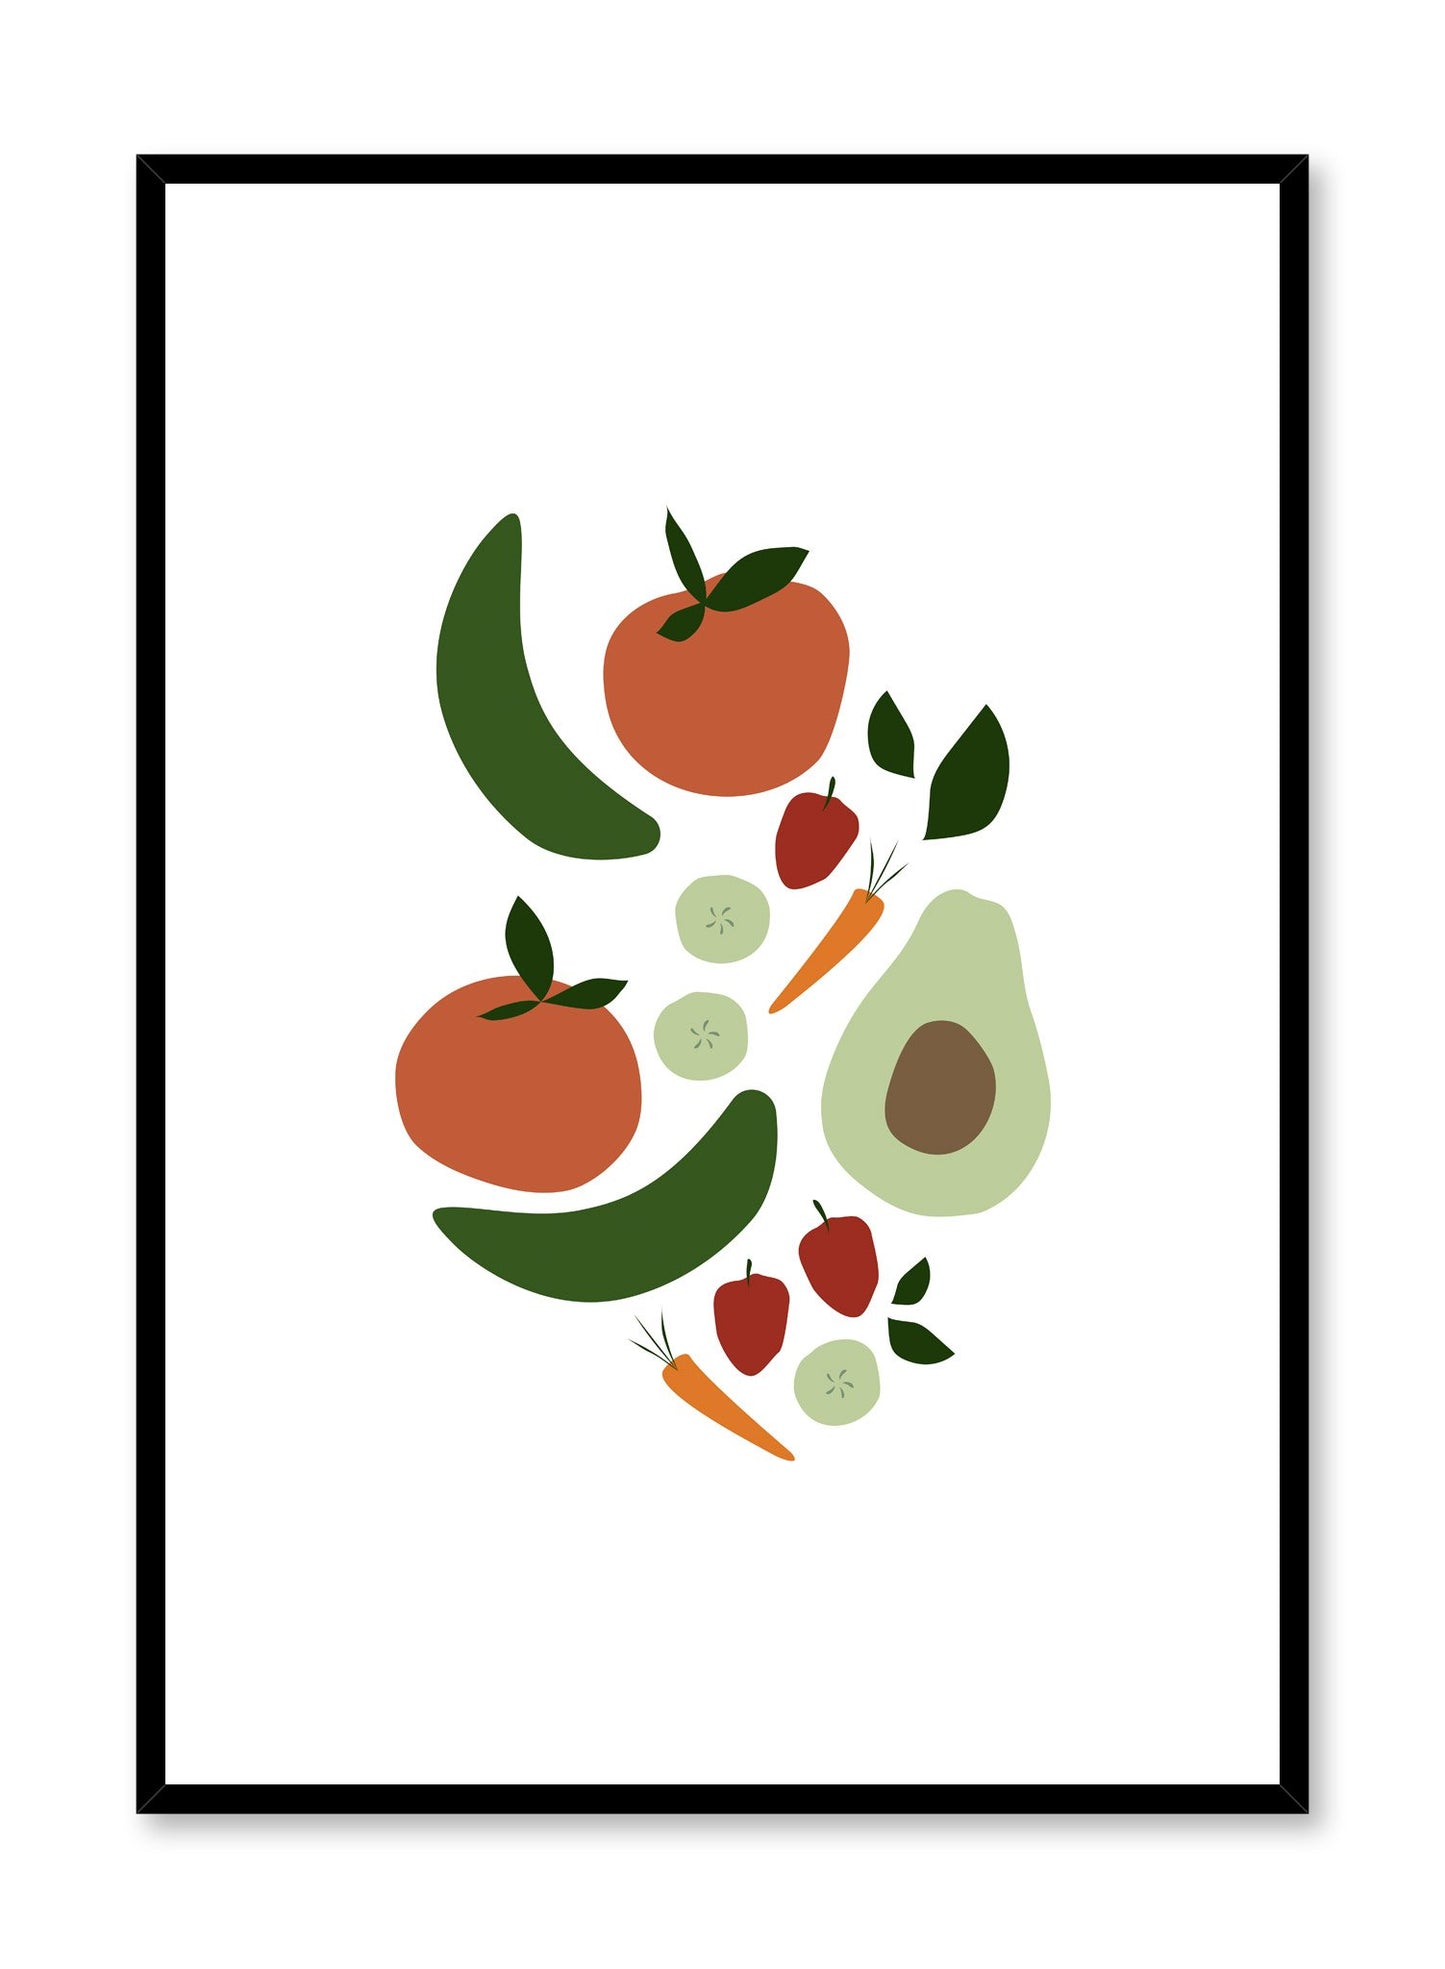 Minimalist poster by Opposite Wall with veggies vegetables food illustration